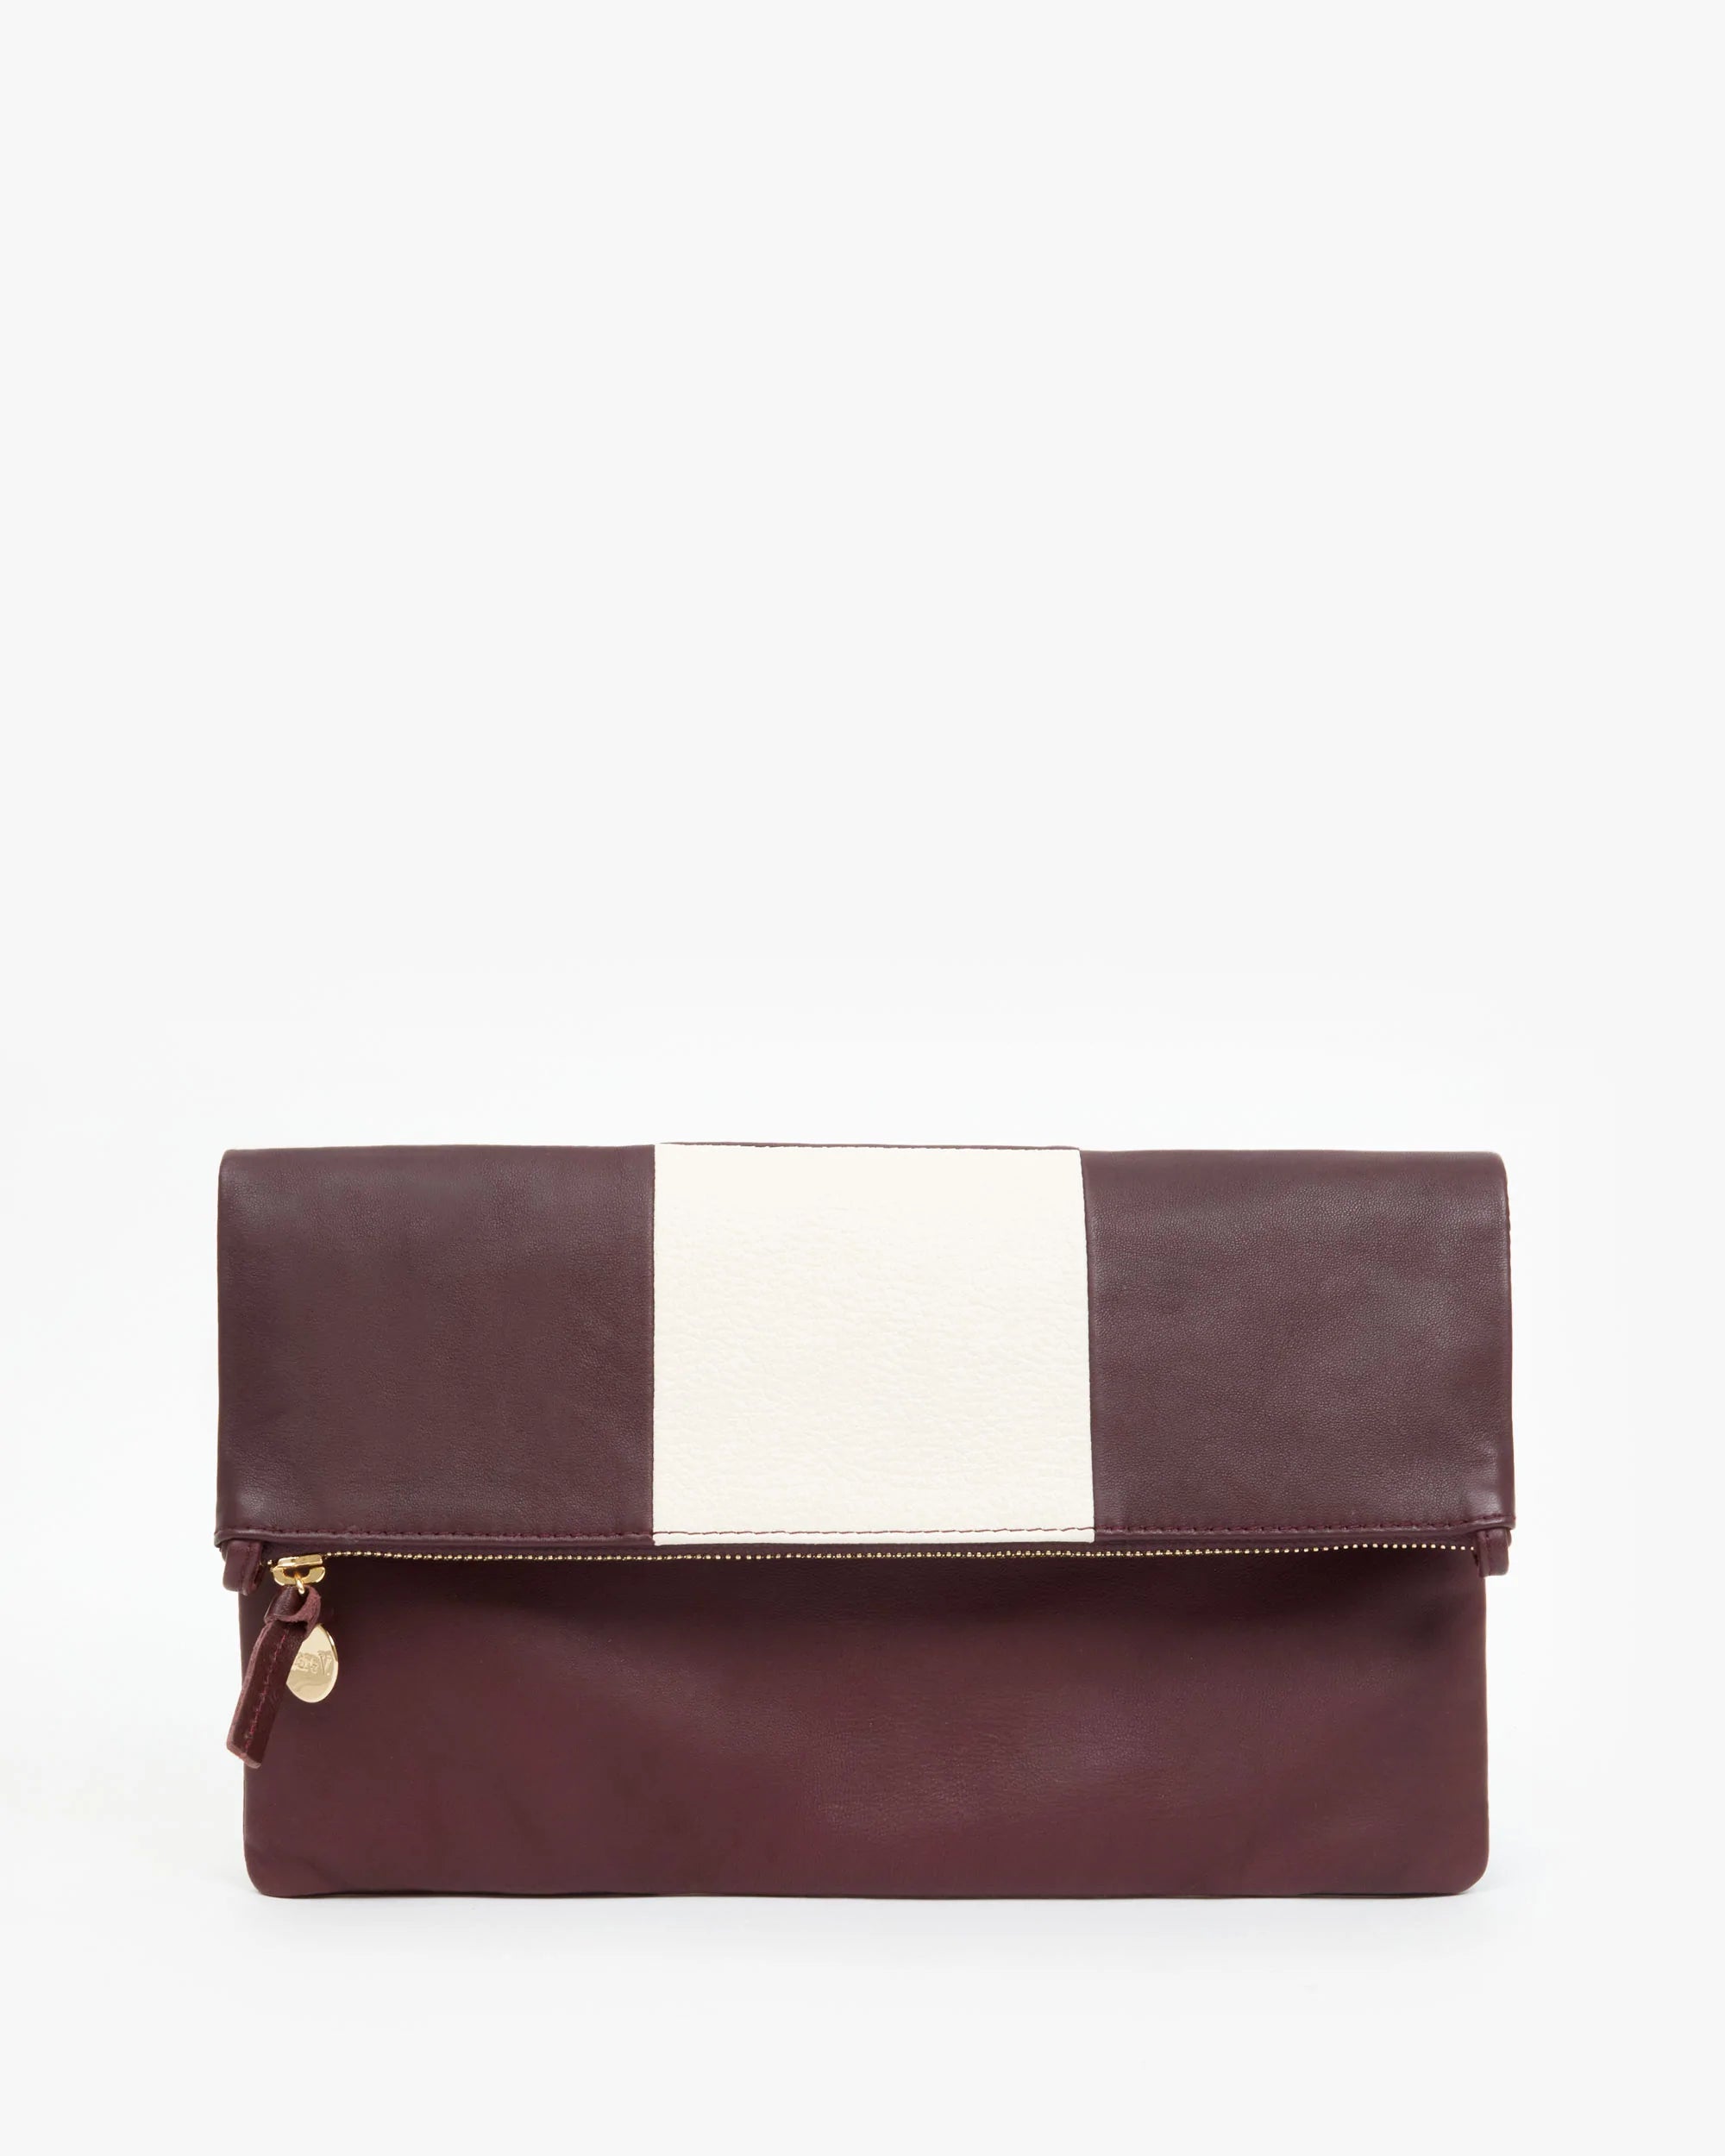 Clare V. Flat Clutch w/ Tabs in Suede, Nappa and Rustic Patchwork